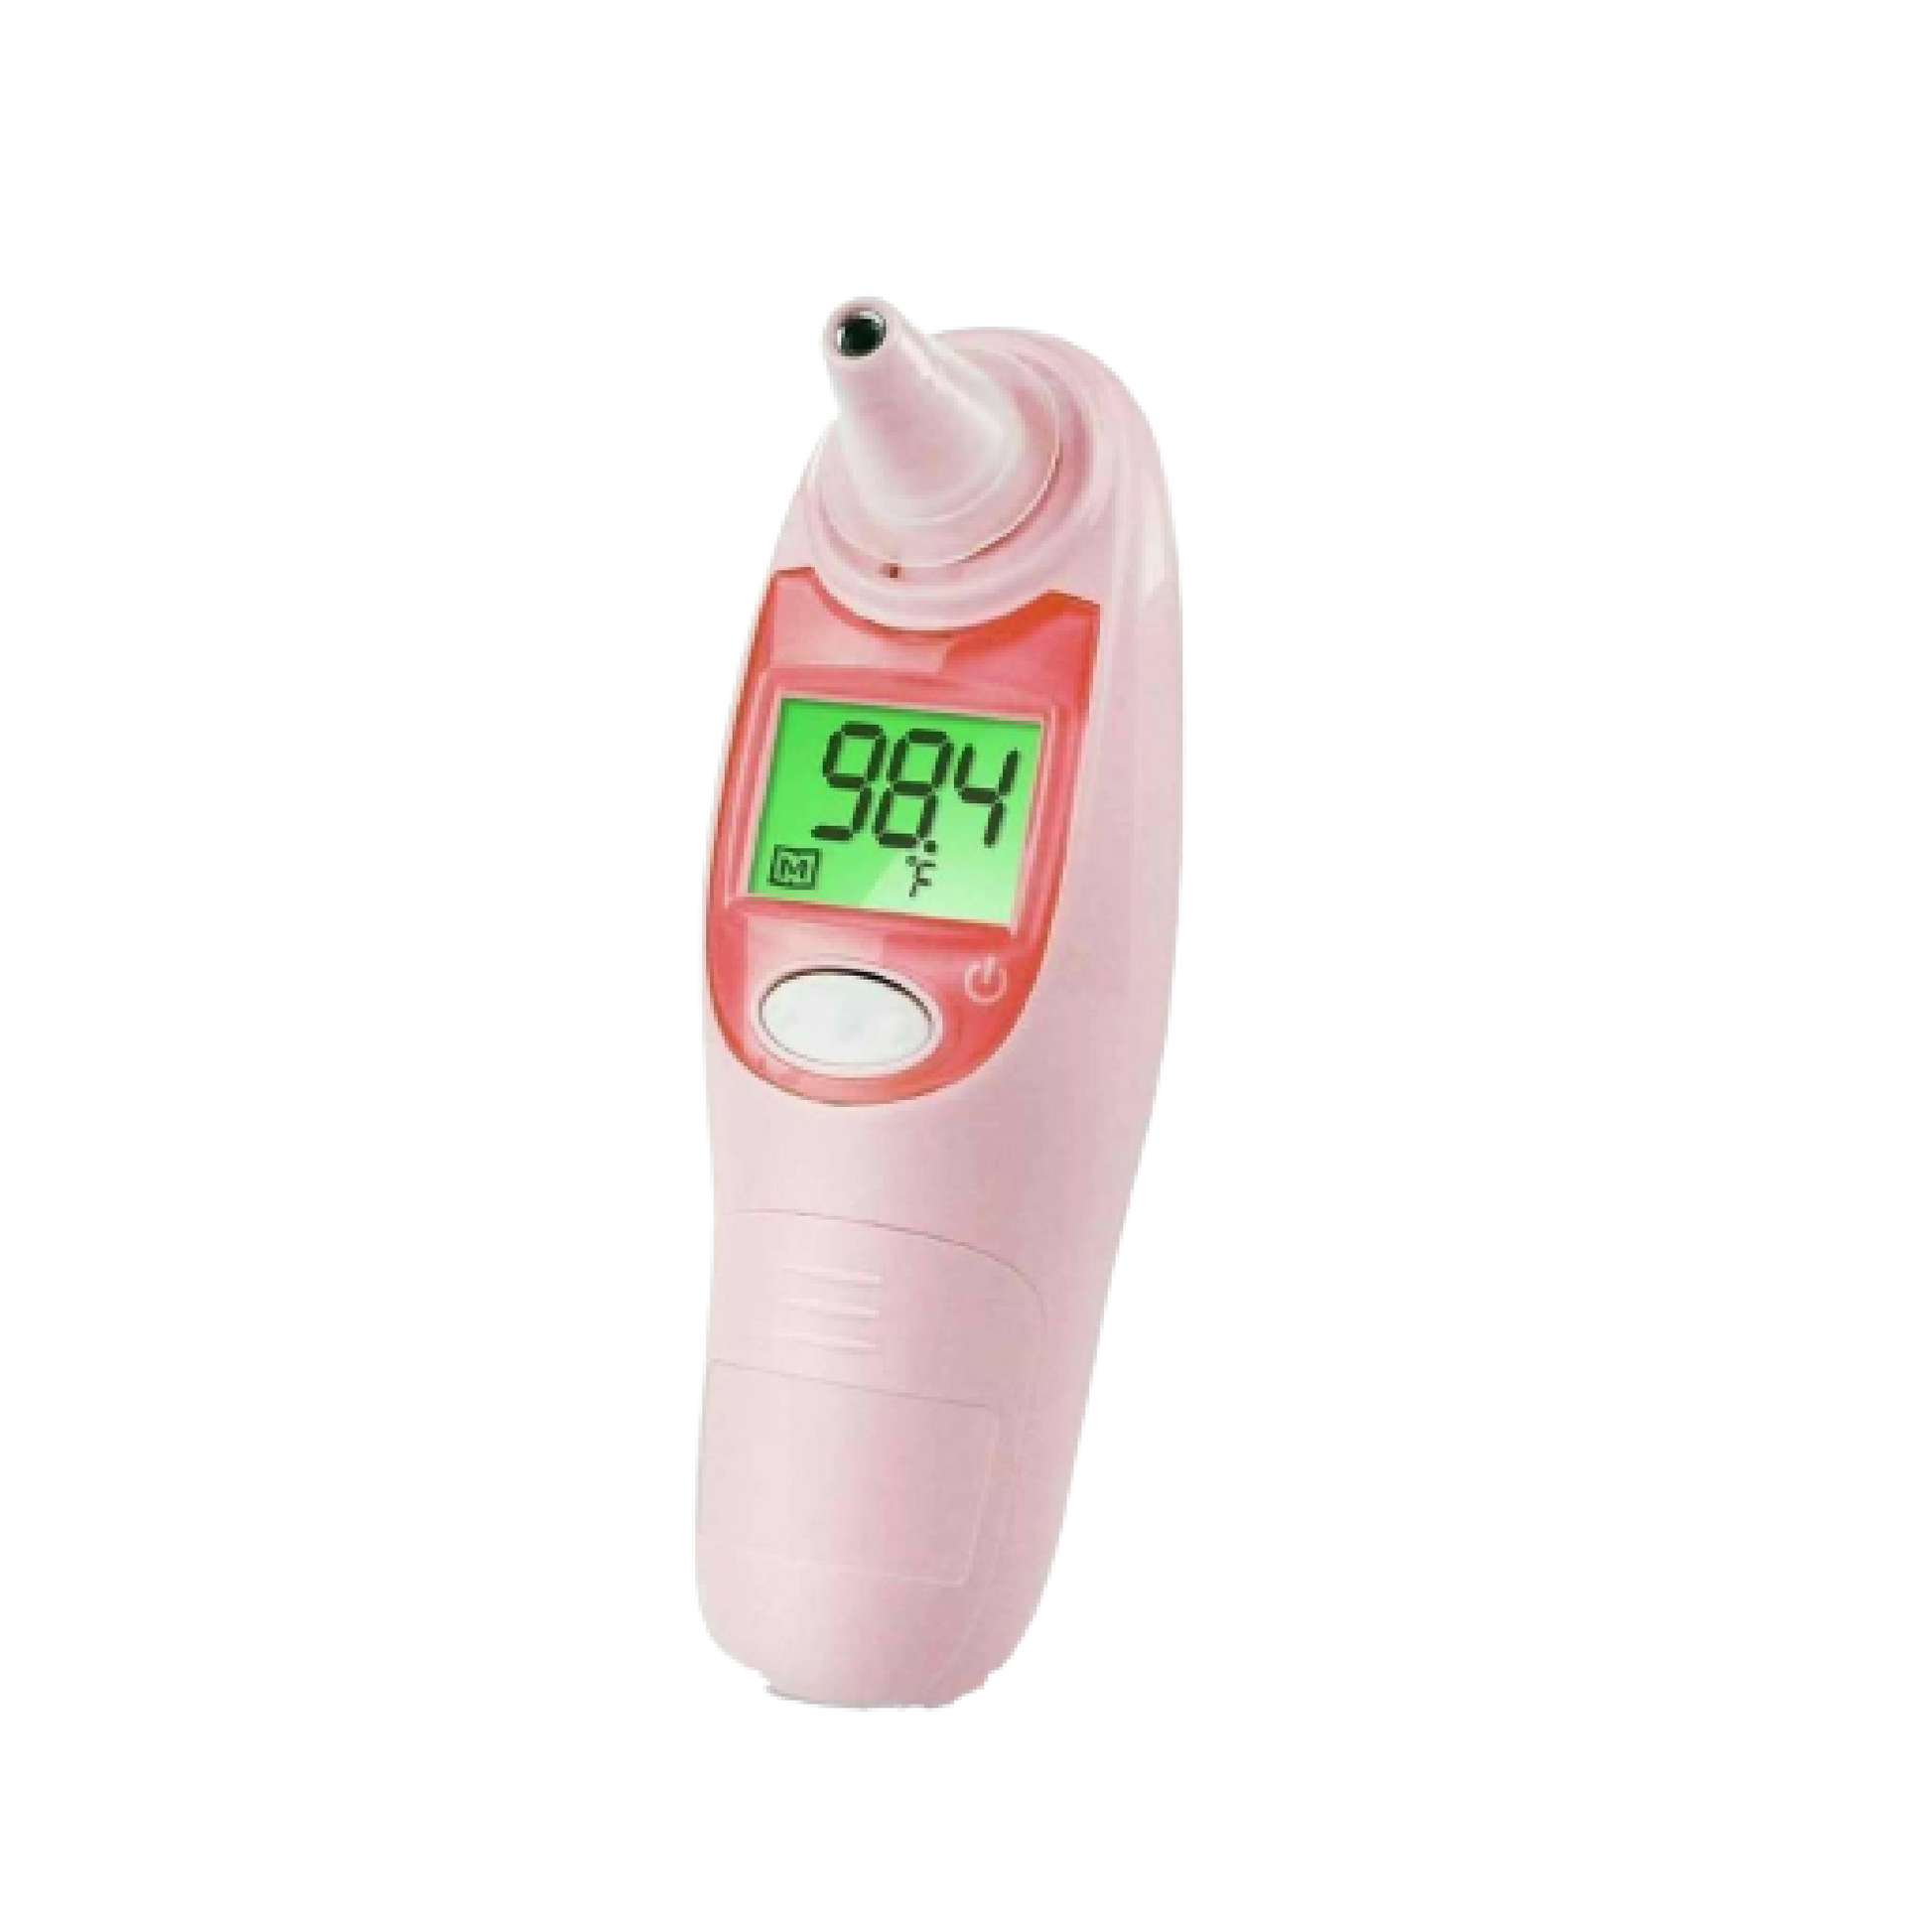 The best-selling product [1000PCS] Ear Thermometer Covers Lens